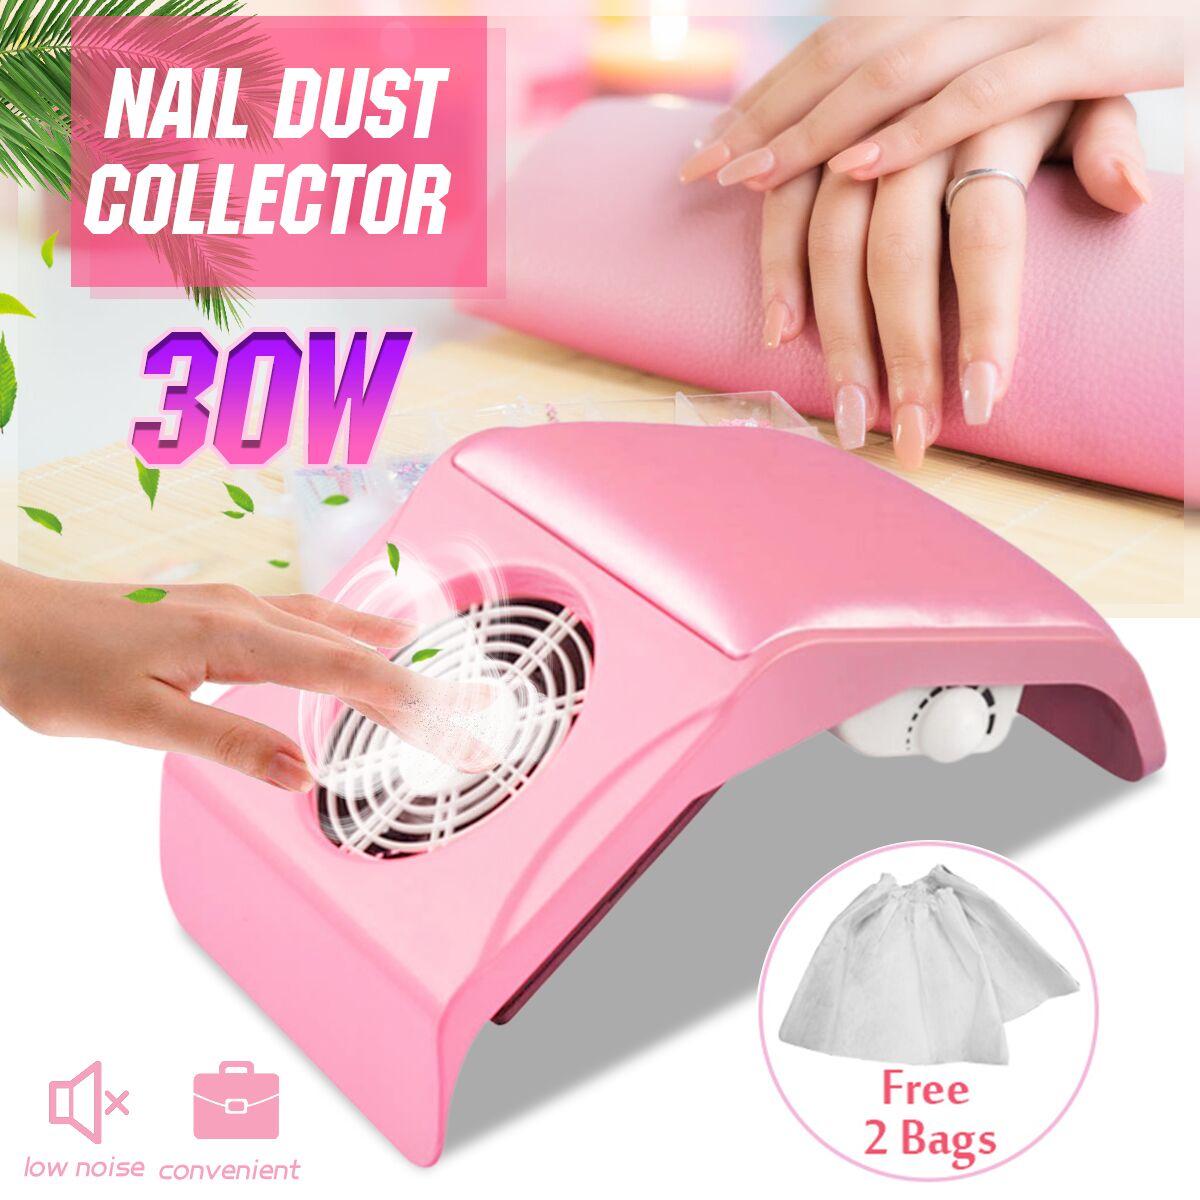 30W Nail Dust Collector Machine Vacuum Cleaner Dryer